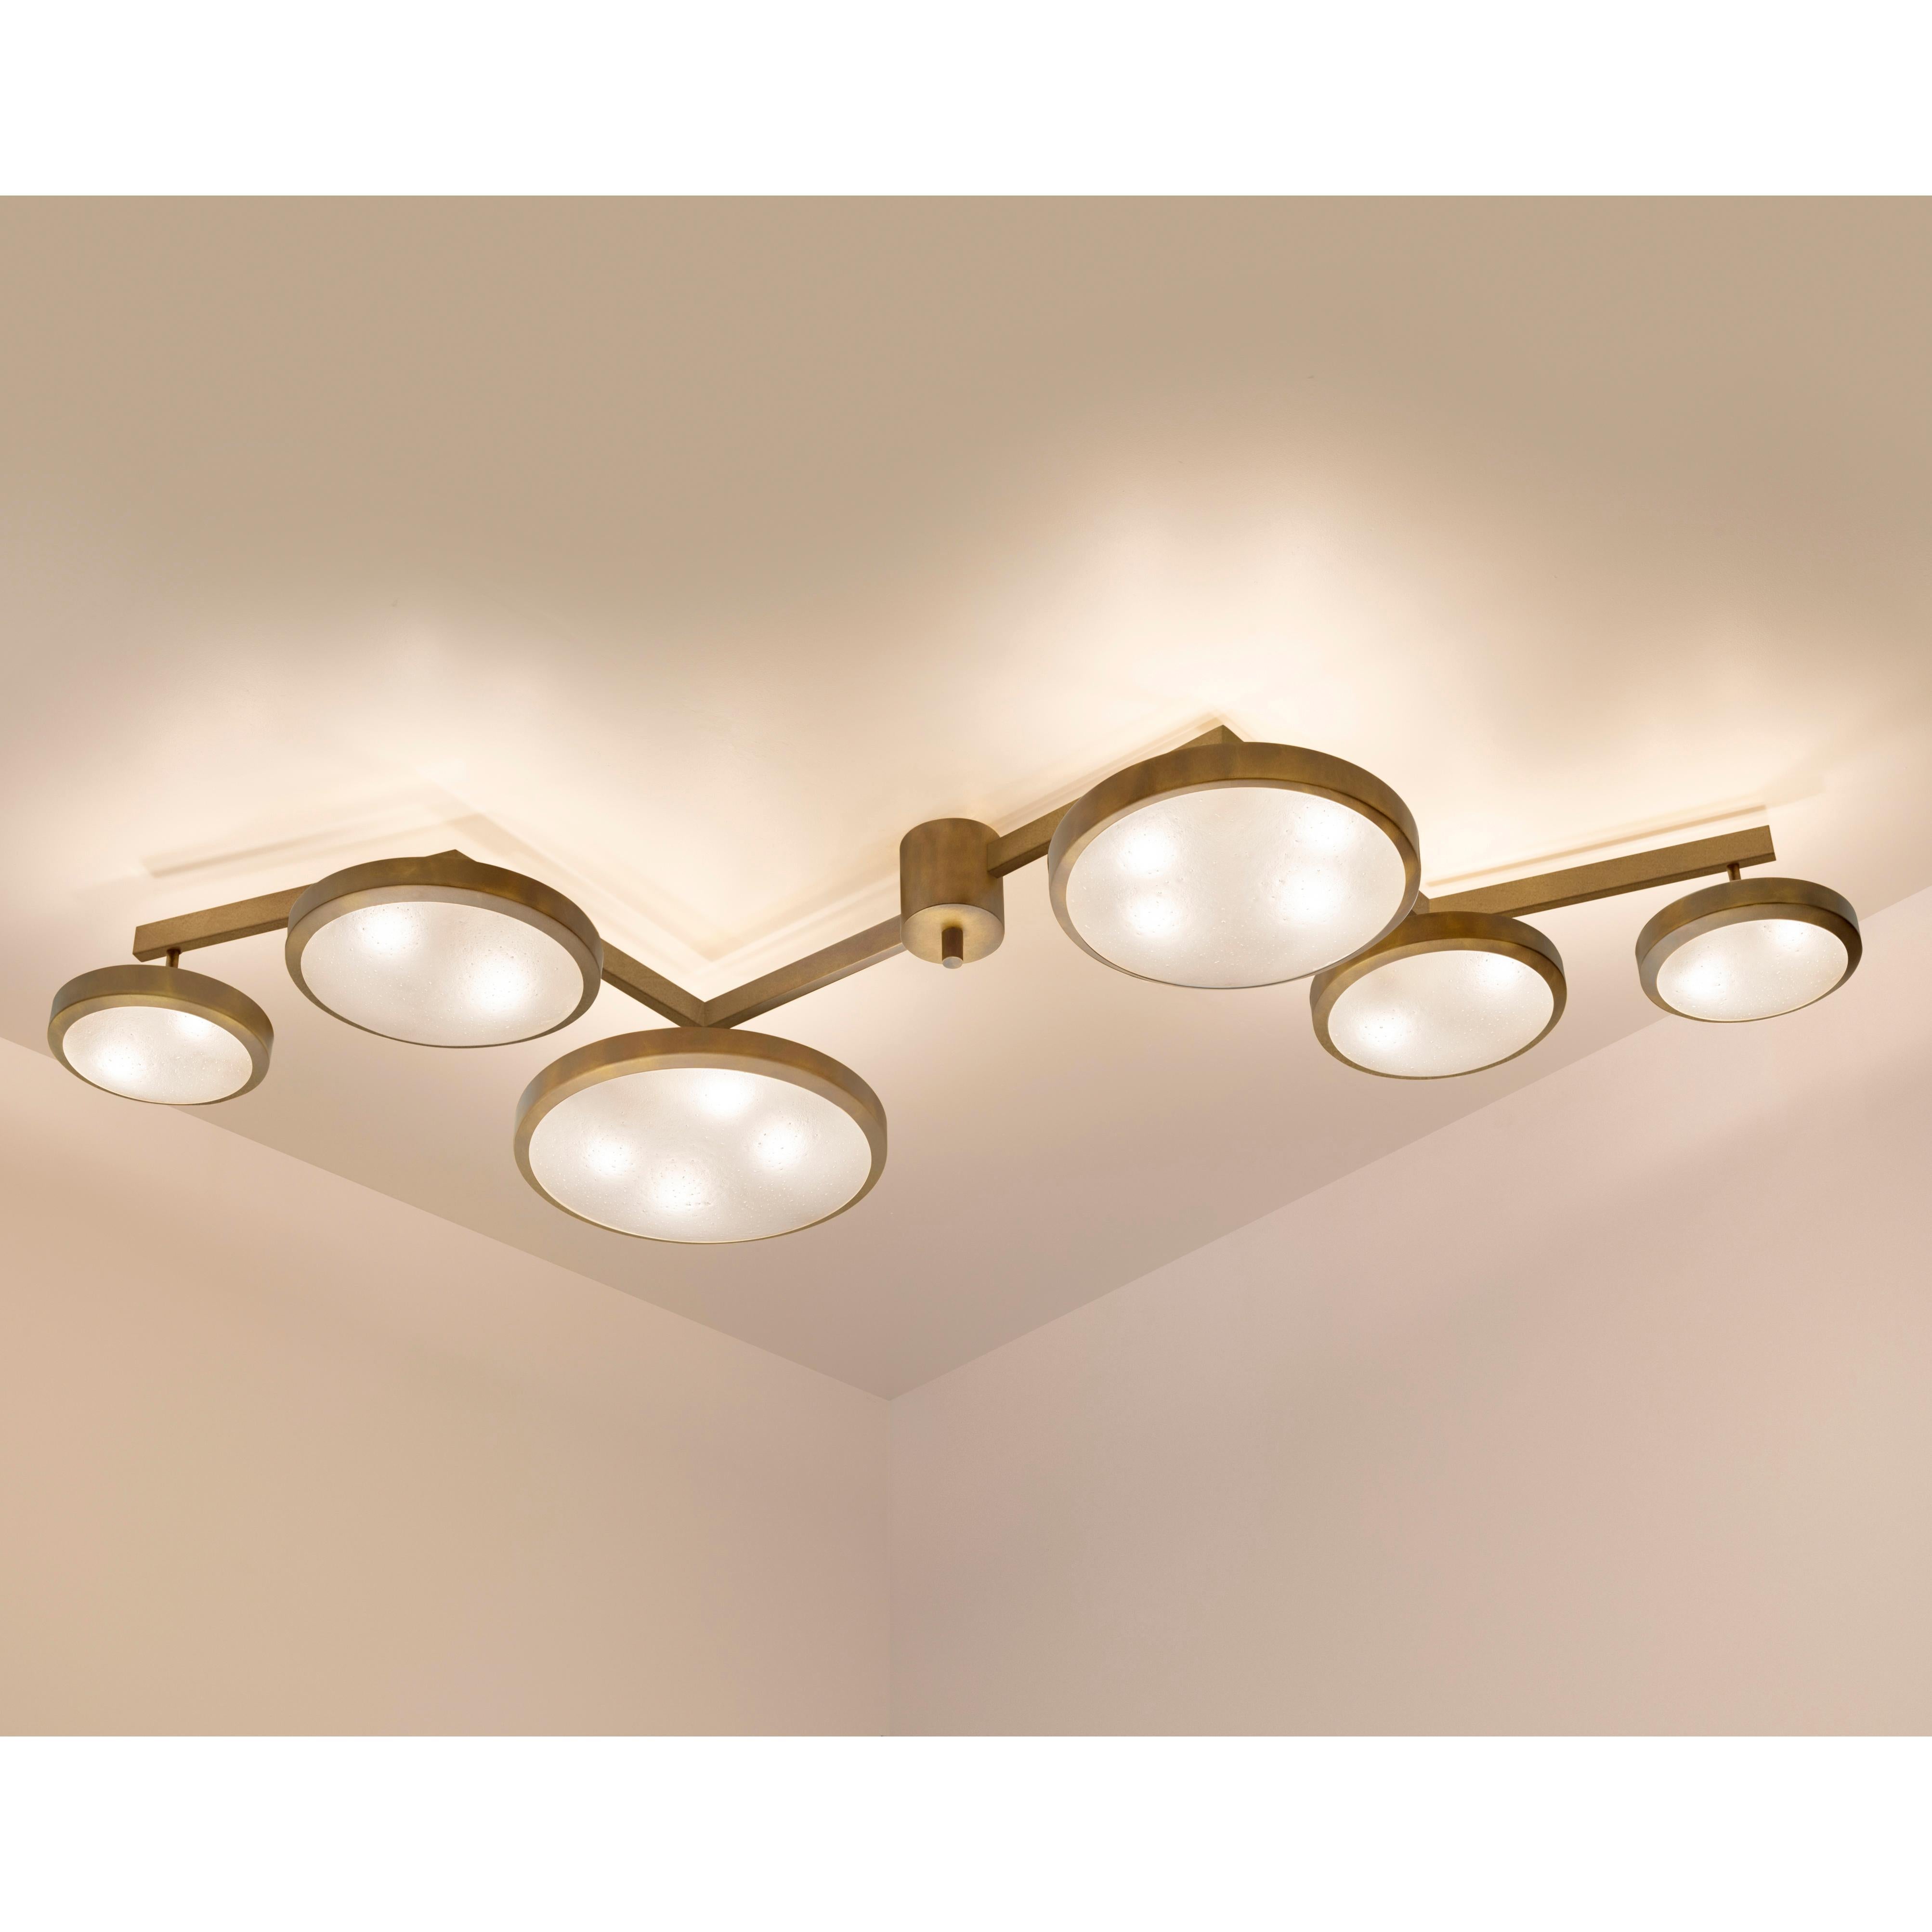 Contemporary Geometria Sospesa Ceiling Light by Gaspare Asaro-Polished Brass Finish For Sale